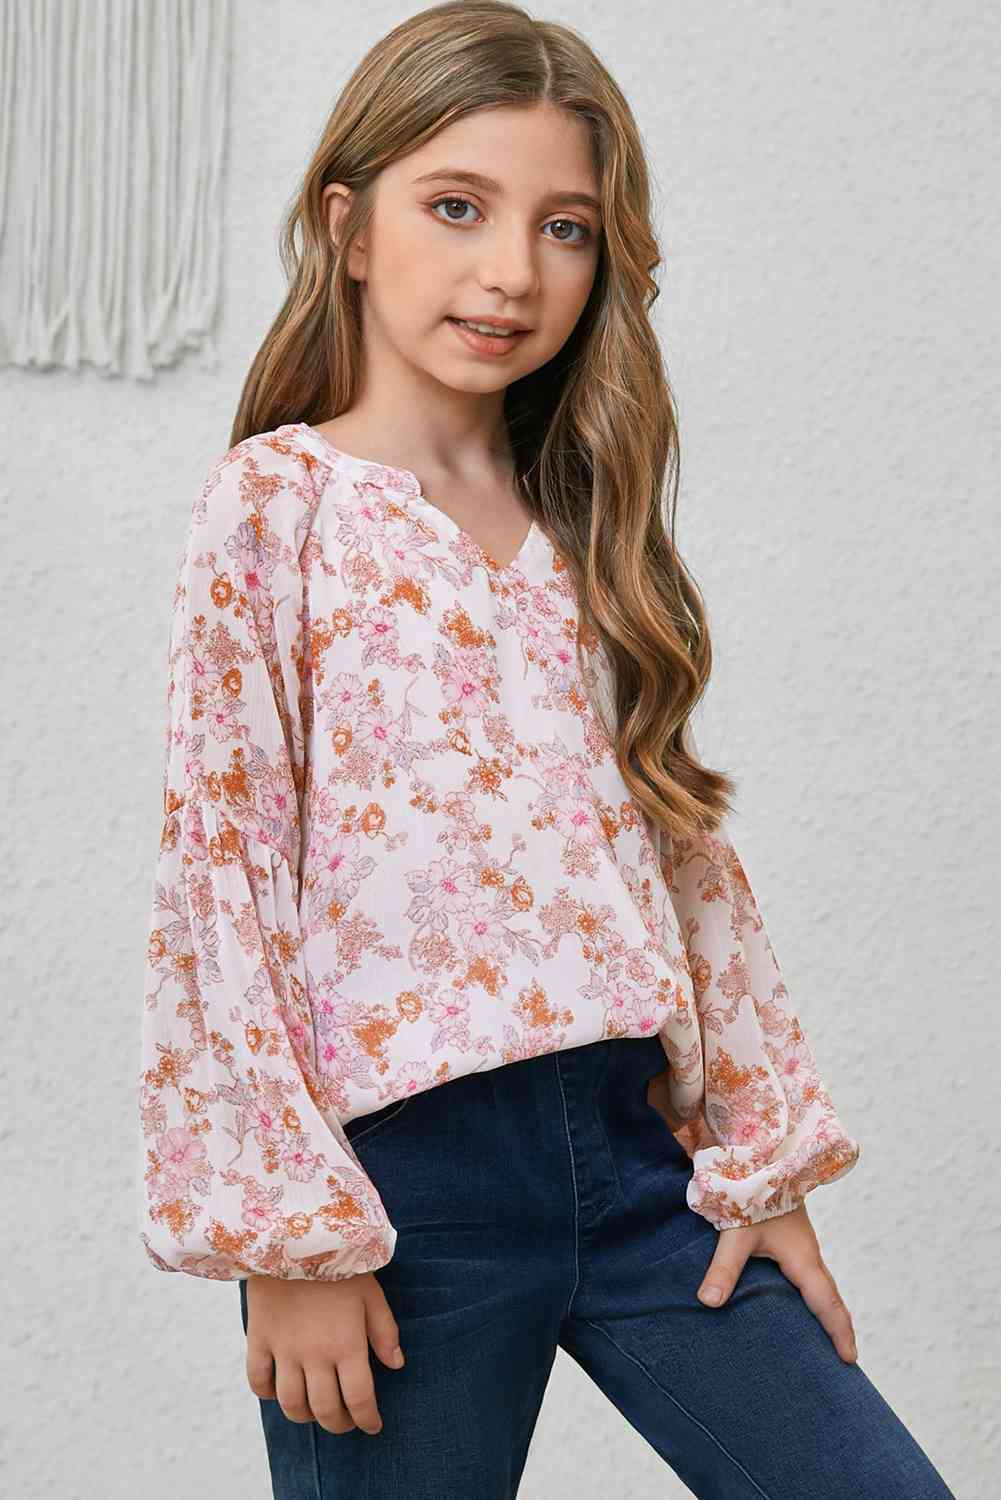 Carrie Ann Girls Notched Neck Puff Sleeve Blouse